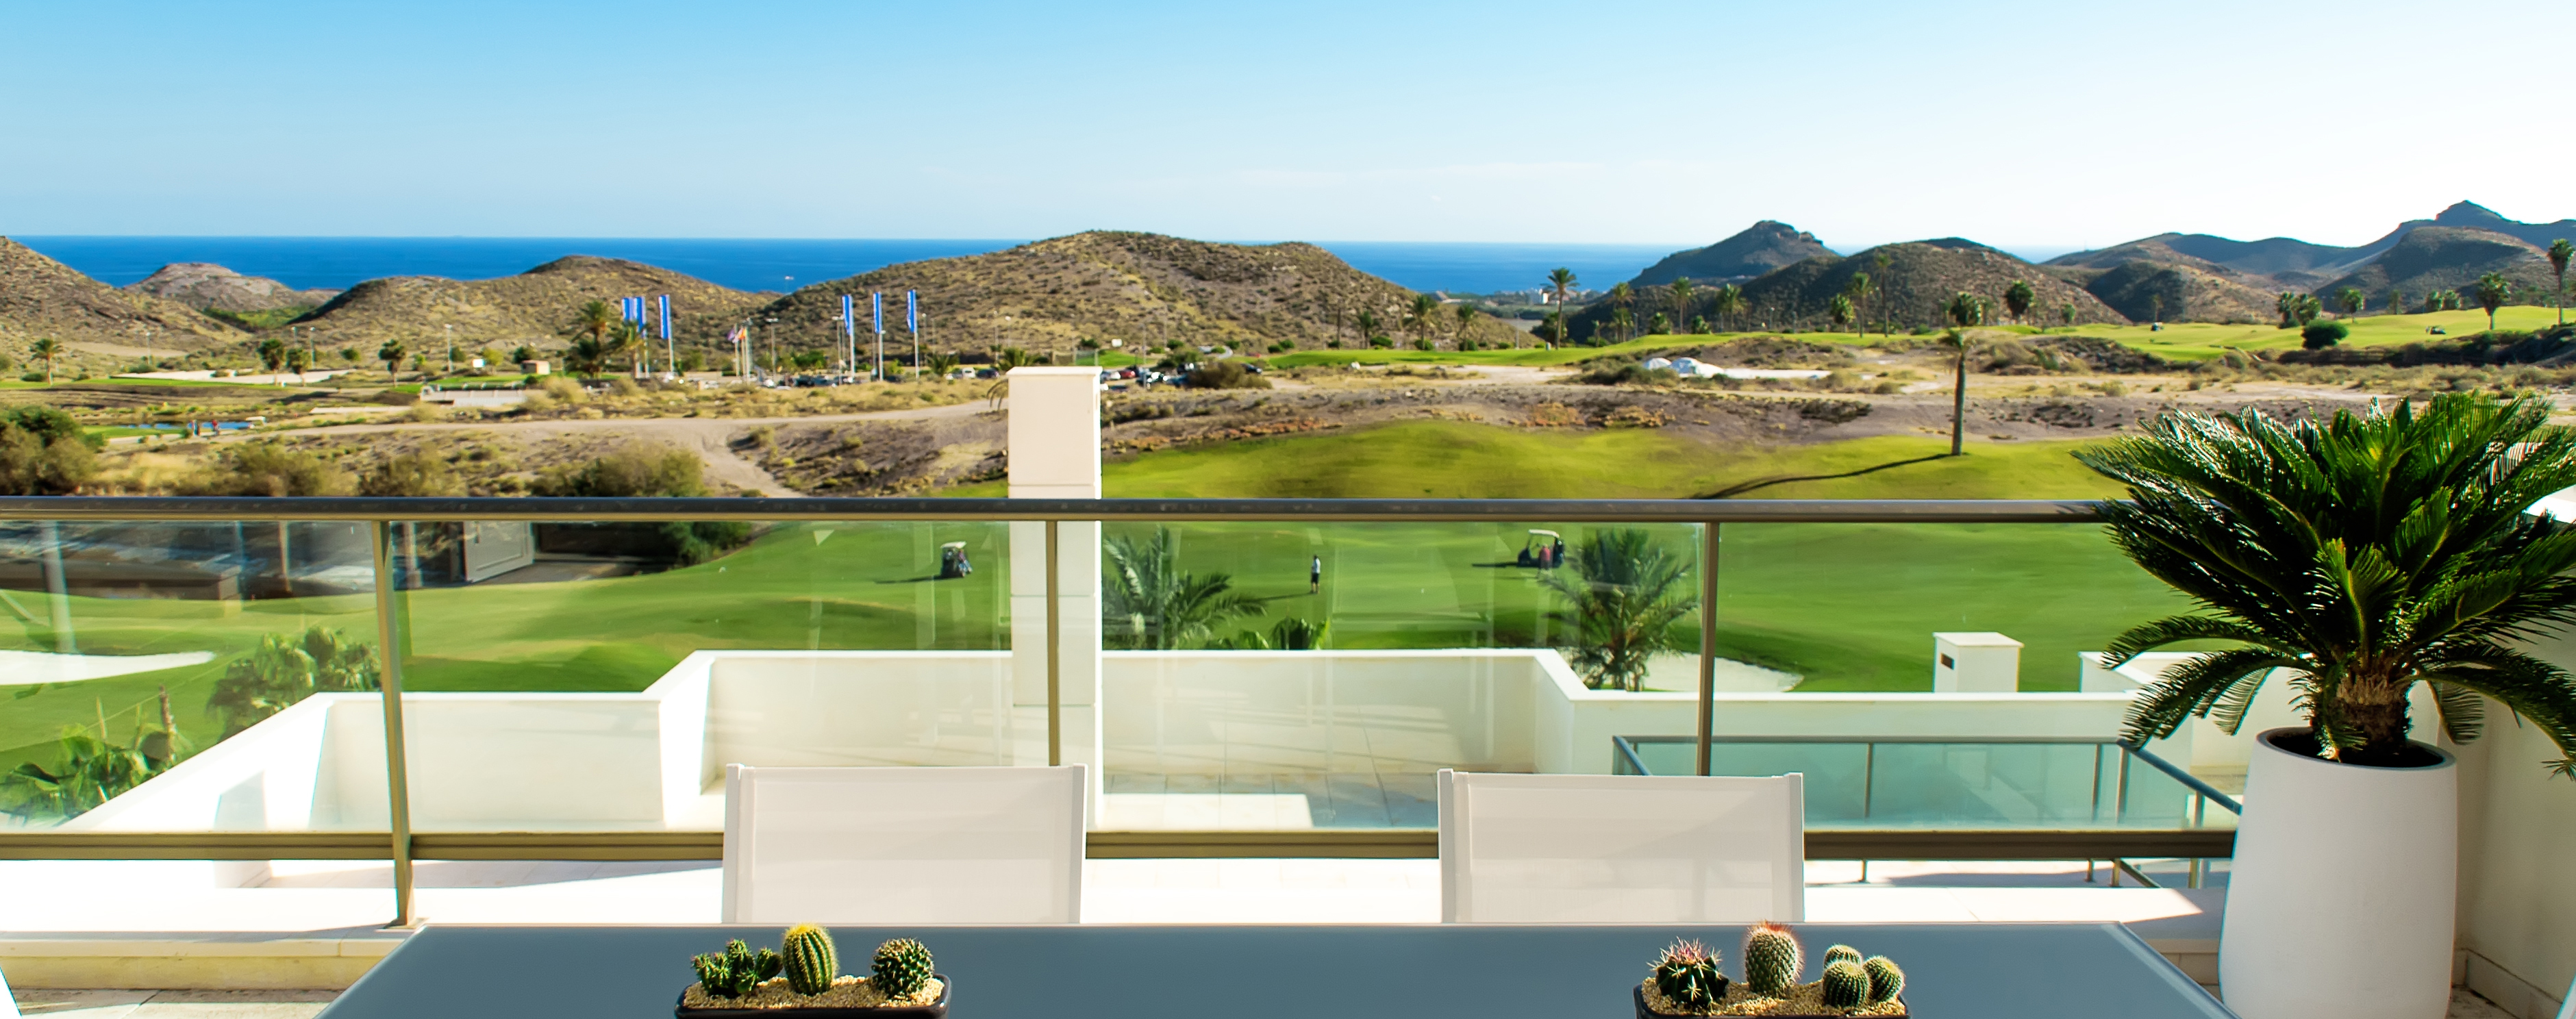 Spacious apartments overlooking the sea and golf